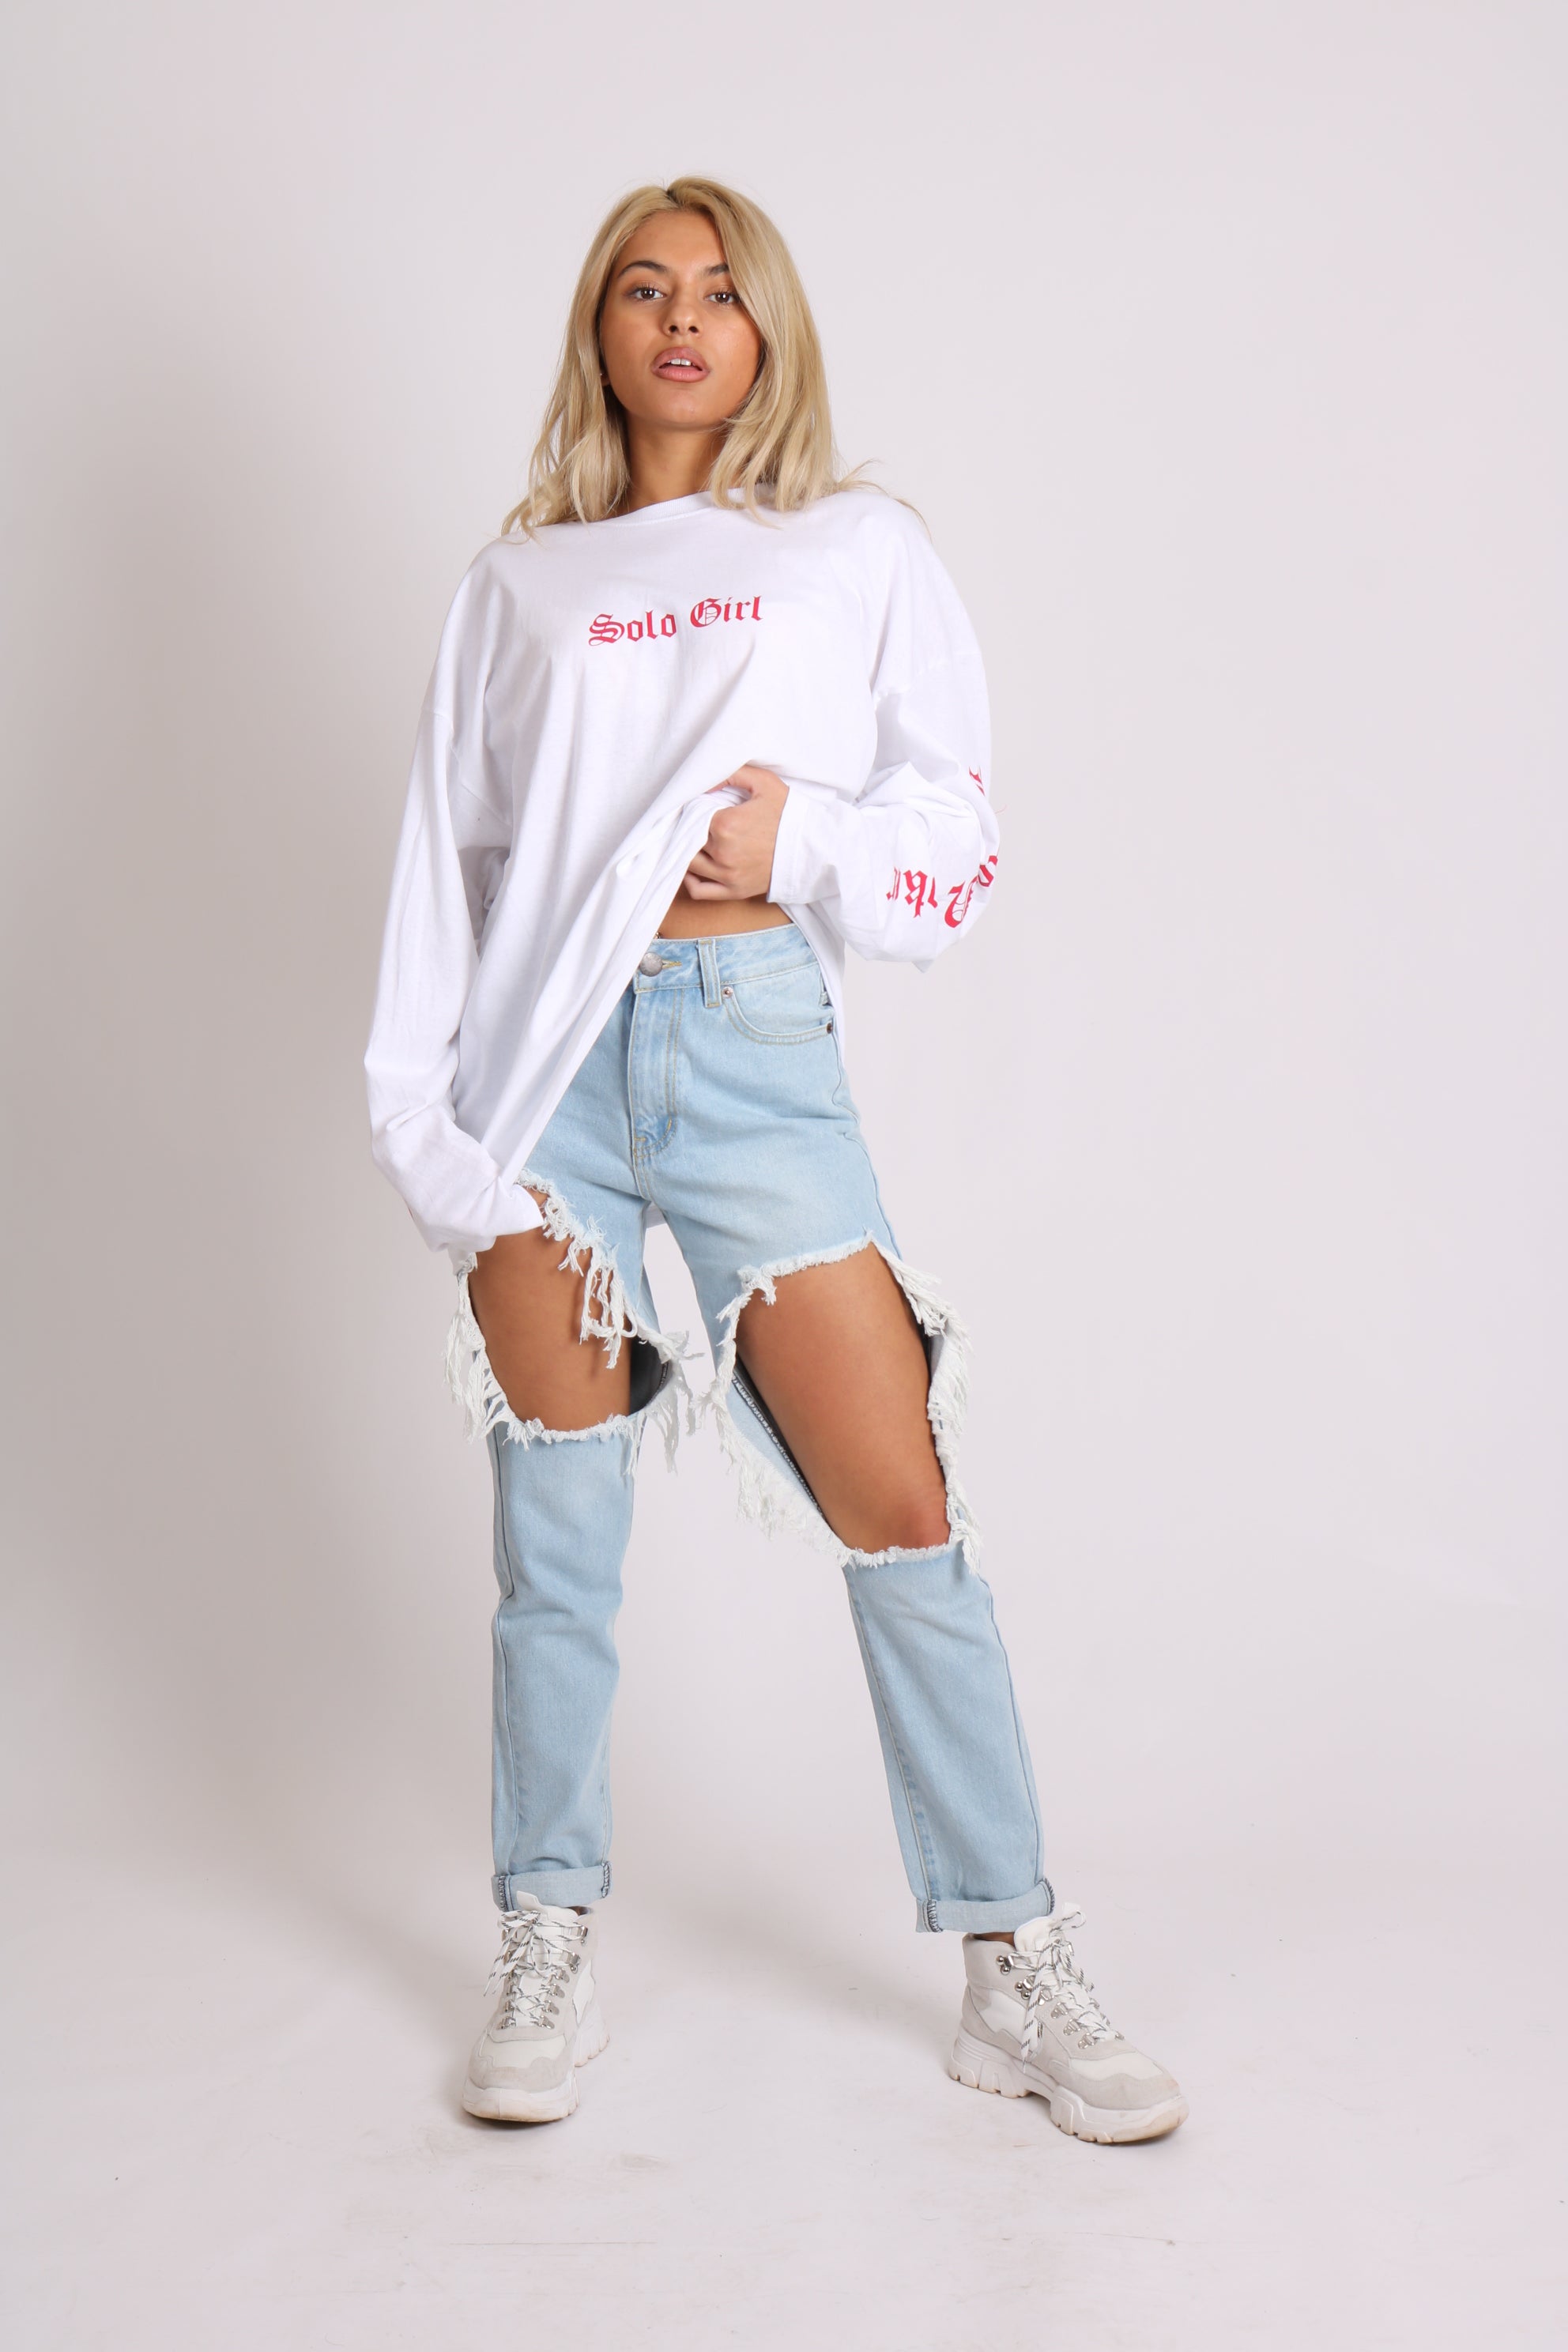 Solo Girl Long Sleeve T-Shirt With Safari Print In White